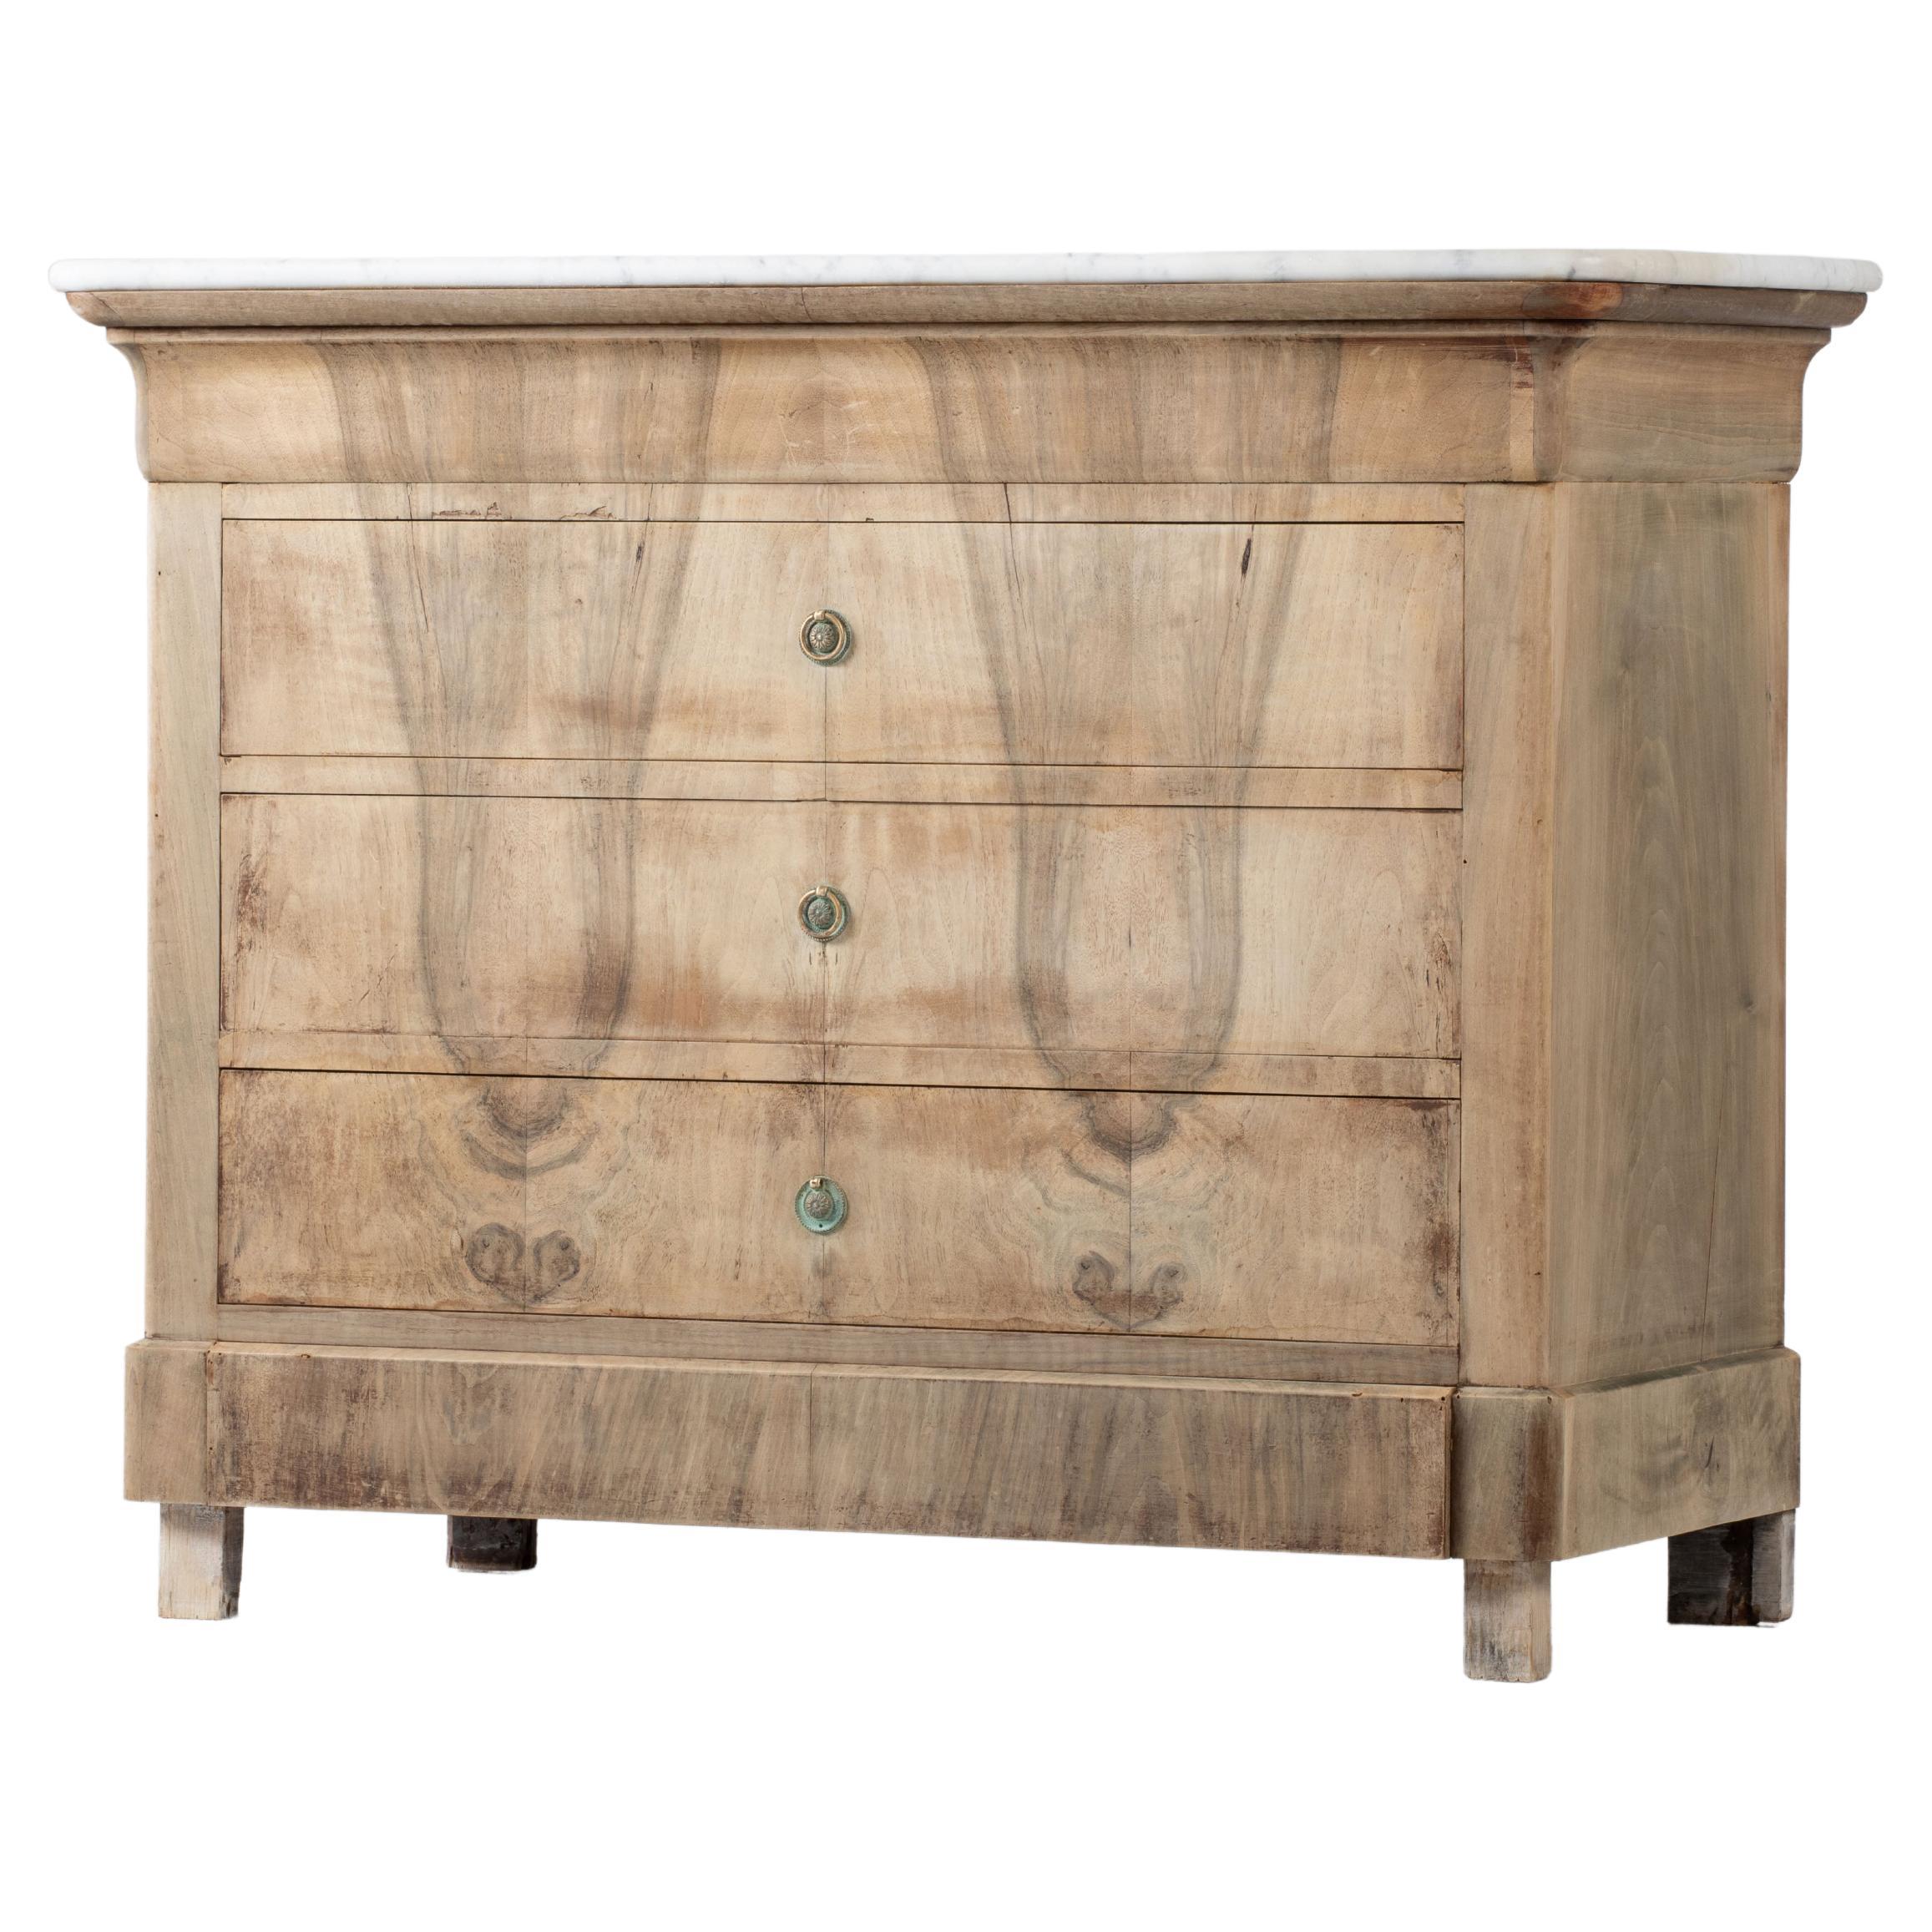 The Louis Philippe Traditional Warm Brown Chest sold at Discount